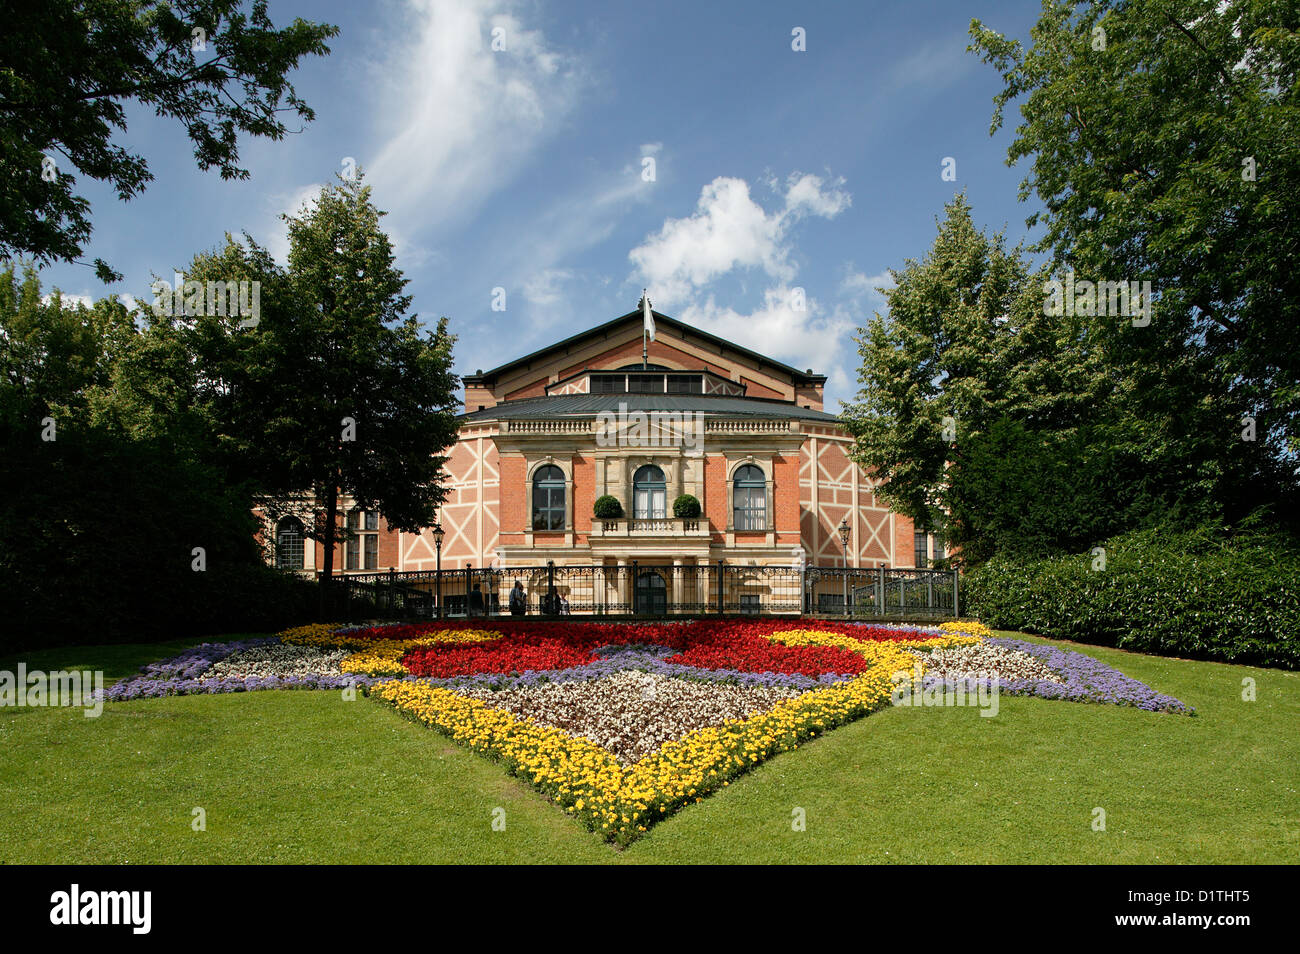 Bayreuth, Germany, the Richard Wagner Festival Hall on the hill Greens Stock Photo